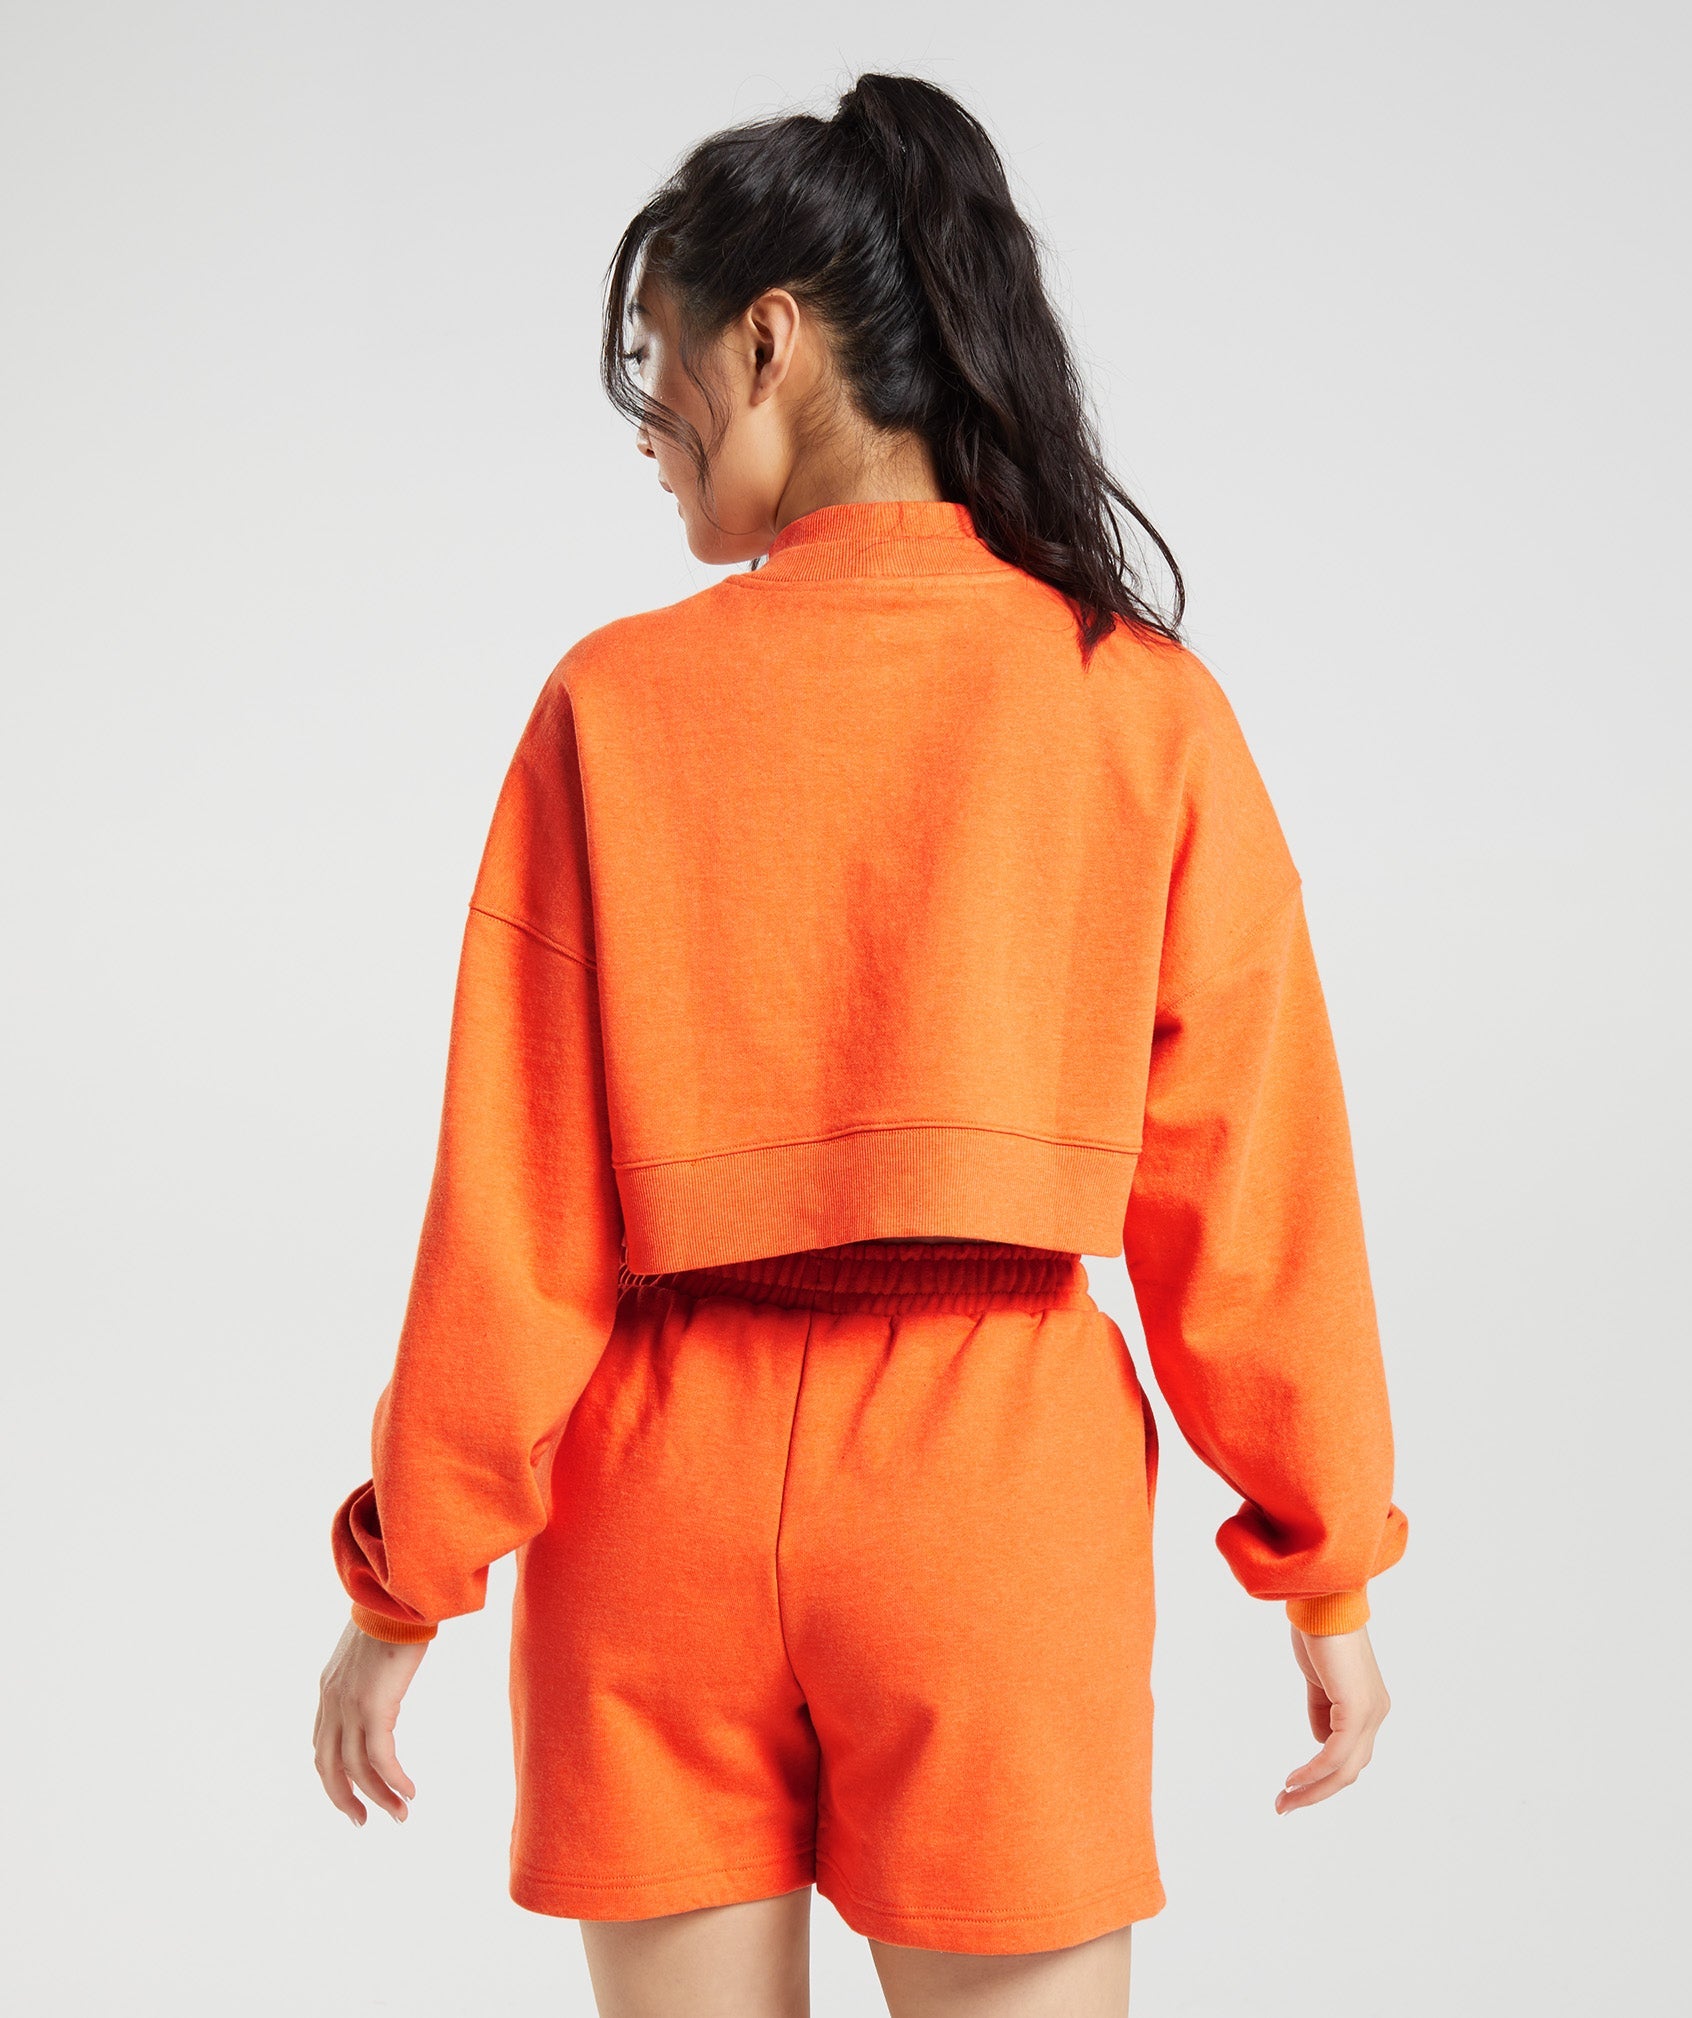 Rest Day Sweats Cropped Pullover in Blaze Orange Marl - view 2